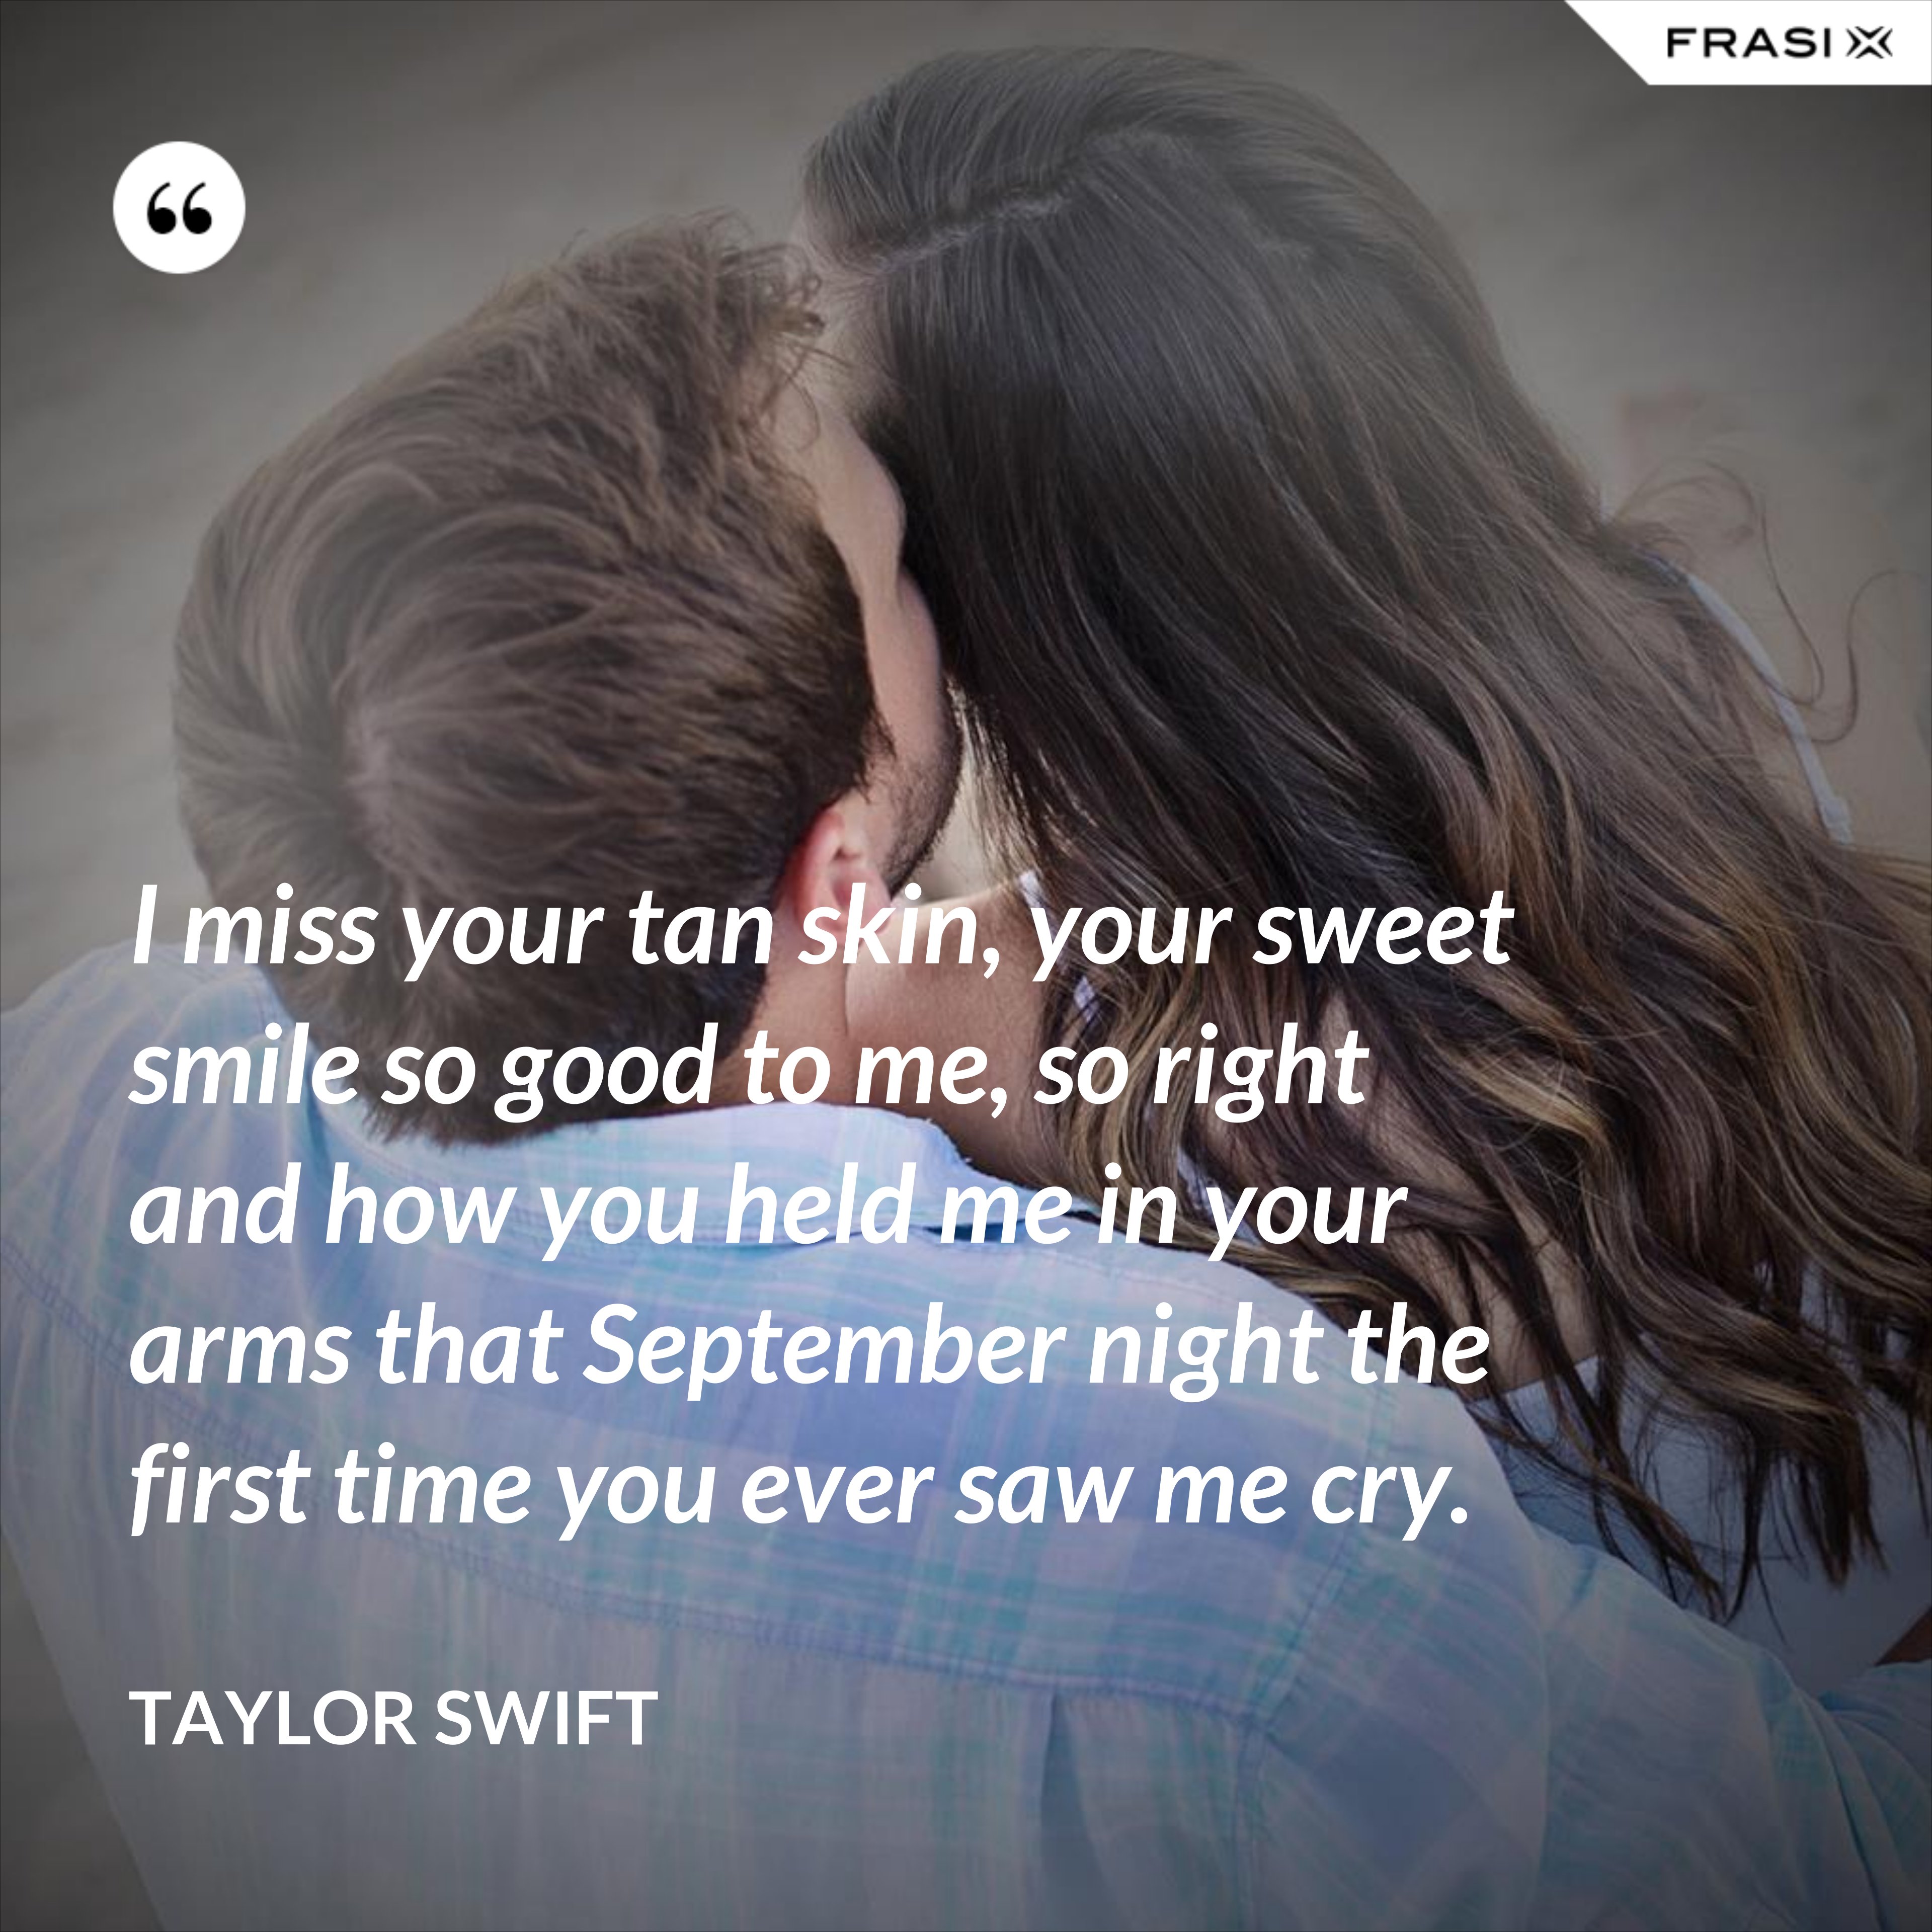 I miss your tan skin, your sweet smile so good to me, so right and how you held me in your arms that September night the first time you ever saw me cry. - Taylor Swift